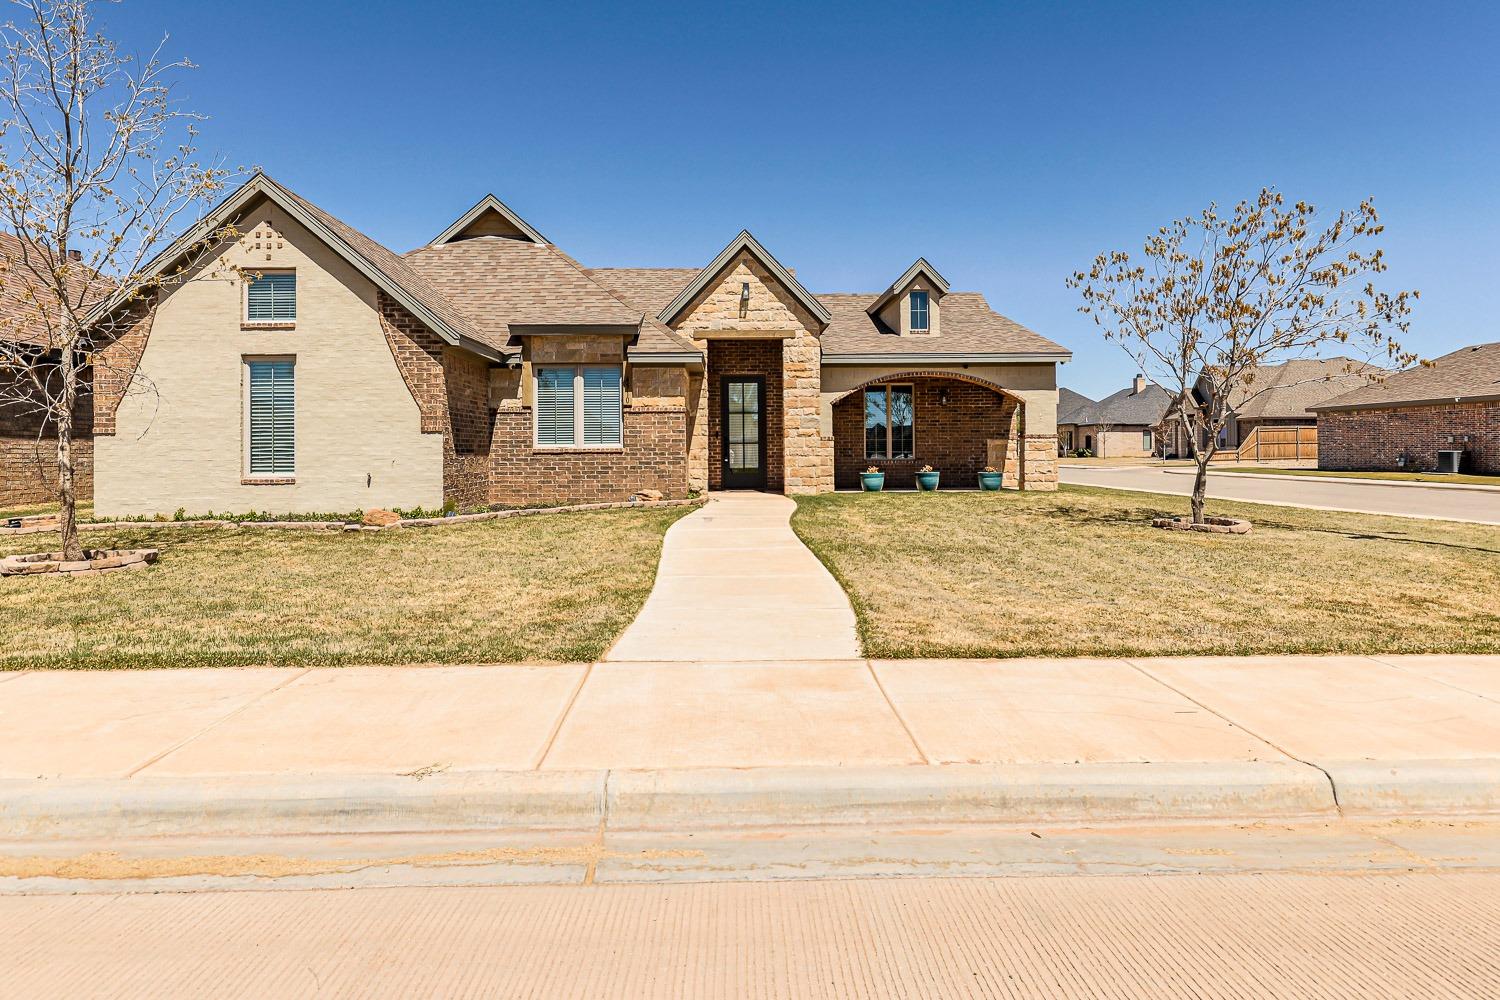 Open House Sat, 4/6 1-3pm! 2% Buyer Incentive up to $10,000 on this meticulously maintained 4/2.5/2 home in Stratford Pointe. Built by Dan Wilson in 2019, this beautiful home showcases his attention to detail. Soaring, vaulted ceilings accented with a wood beam match the fireplace trim, as well as the vent hood, flanked by floating shelves. Well placed windows make the rooms bright & airy. The gourmet kitchen offers a large island with stainless steel farm sink, two ovens, & a five-burner gas cooktop. The enclosed back patio offers additional living space for a multitude of purposes. The master ensuite, with double lavatories, presents a peaceful place to unwind in the soaking tub or large shower. A mud bench, desk, and half bath are located outside of the utility room. The surveillance system is hardwired, the 7.4 KW solar panels with transferrable warranty, & smart app to control the sprinkler system will convey. Seller relocated for work and will consider any reasonable offer.